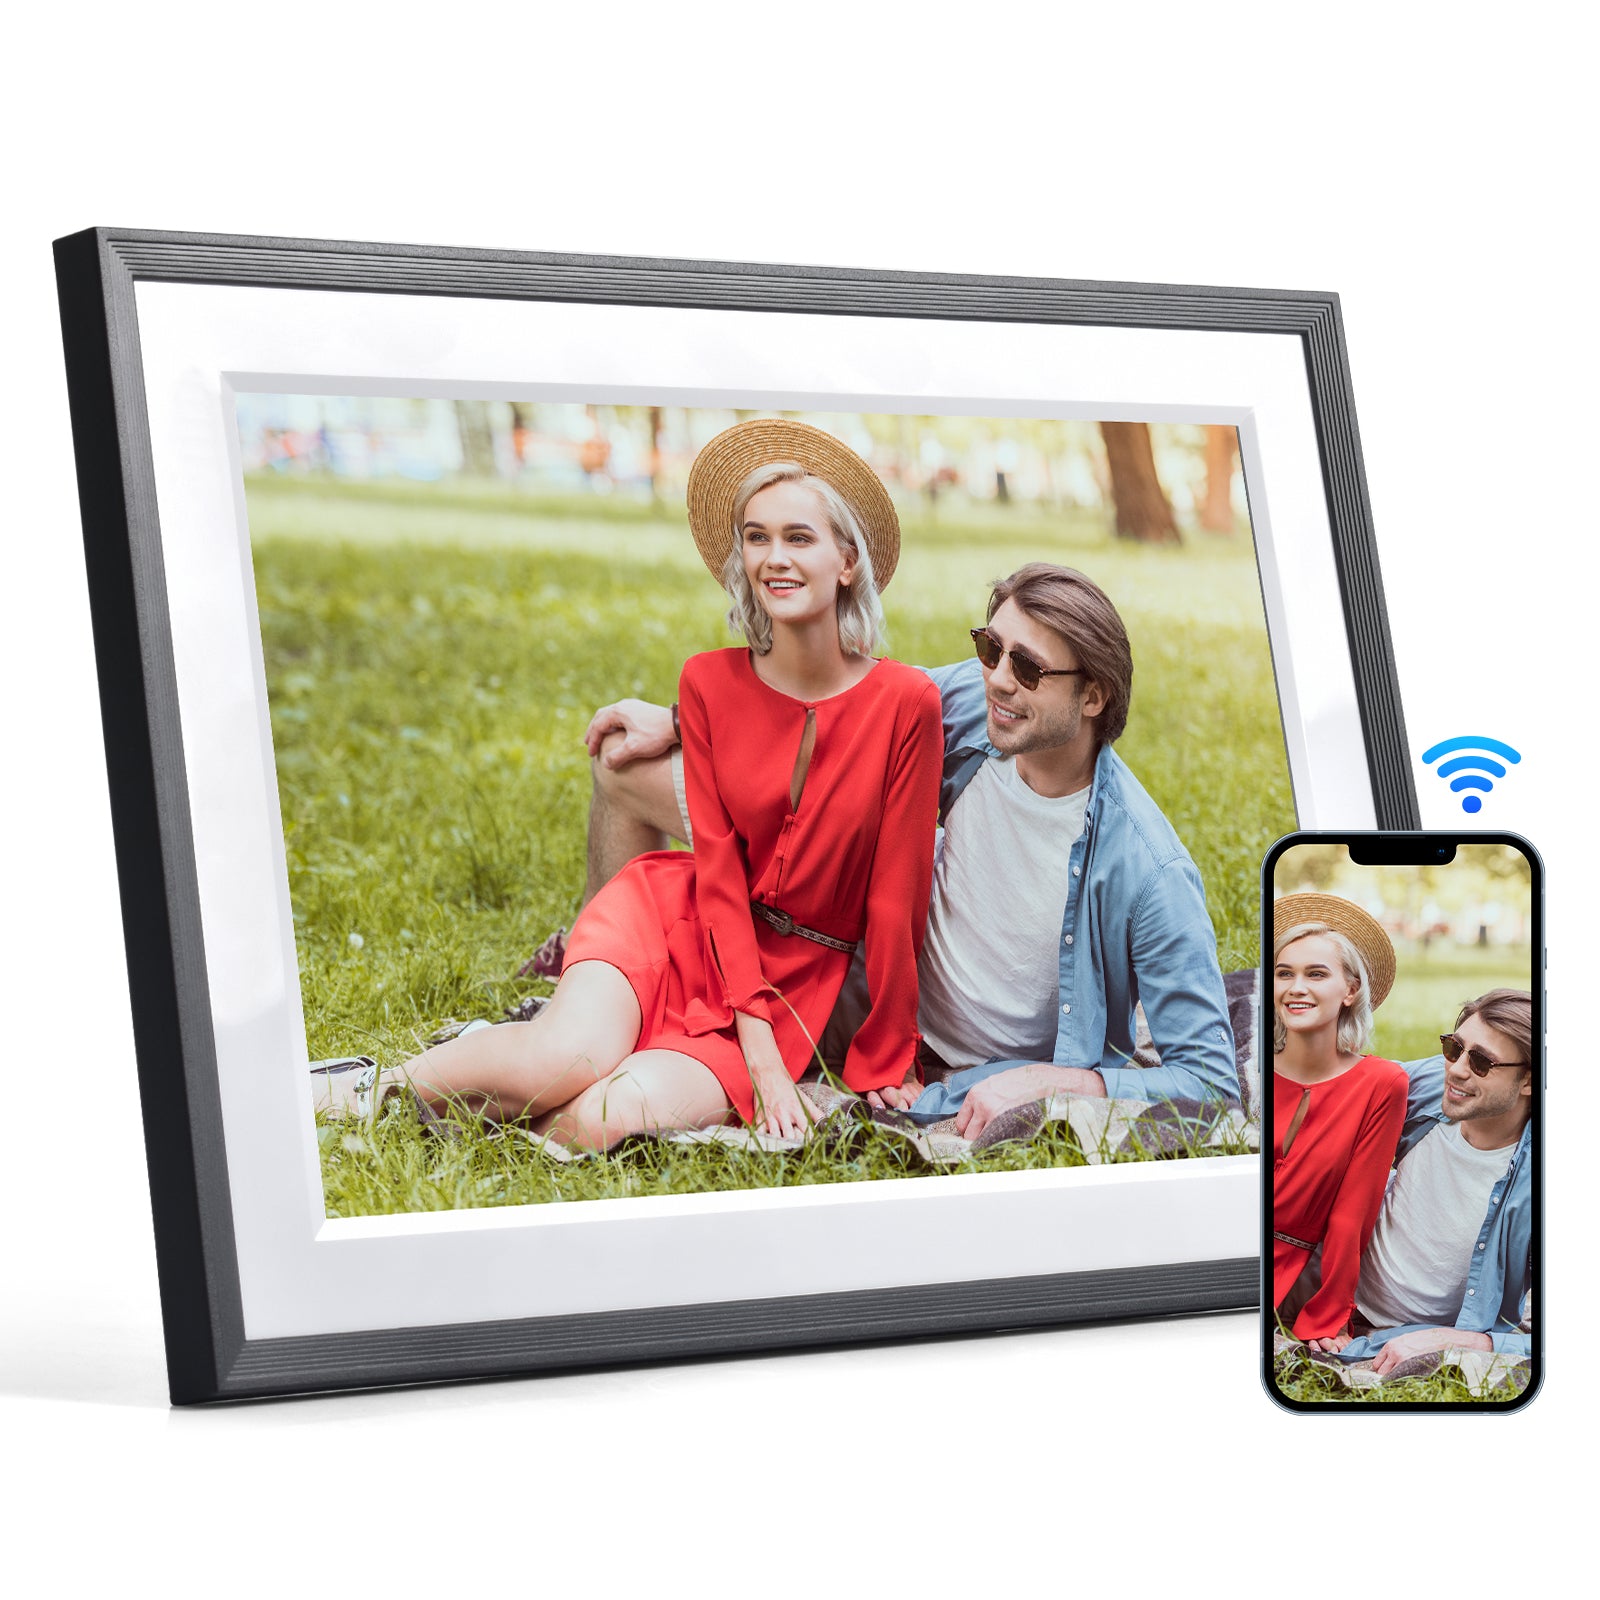 KODAK 10.1-inch Classic Digital Photo Frame RCF-1018, Wi-Fi Enabled, 32GB Touch-Screen Display with Automatic Rotation, Music, Video, Weather and Calendar